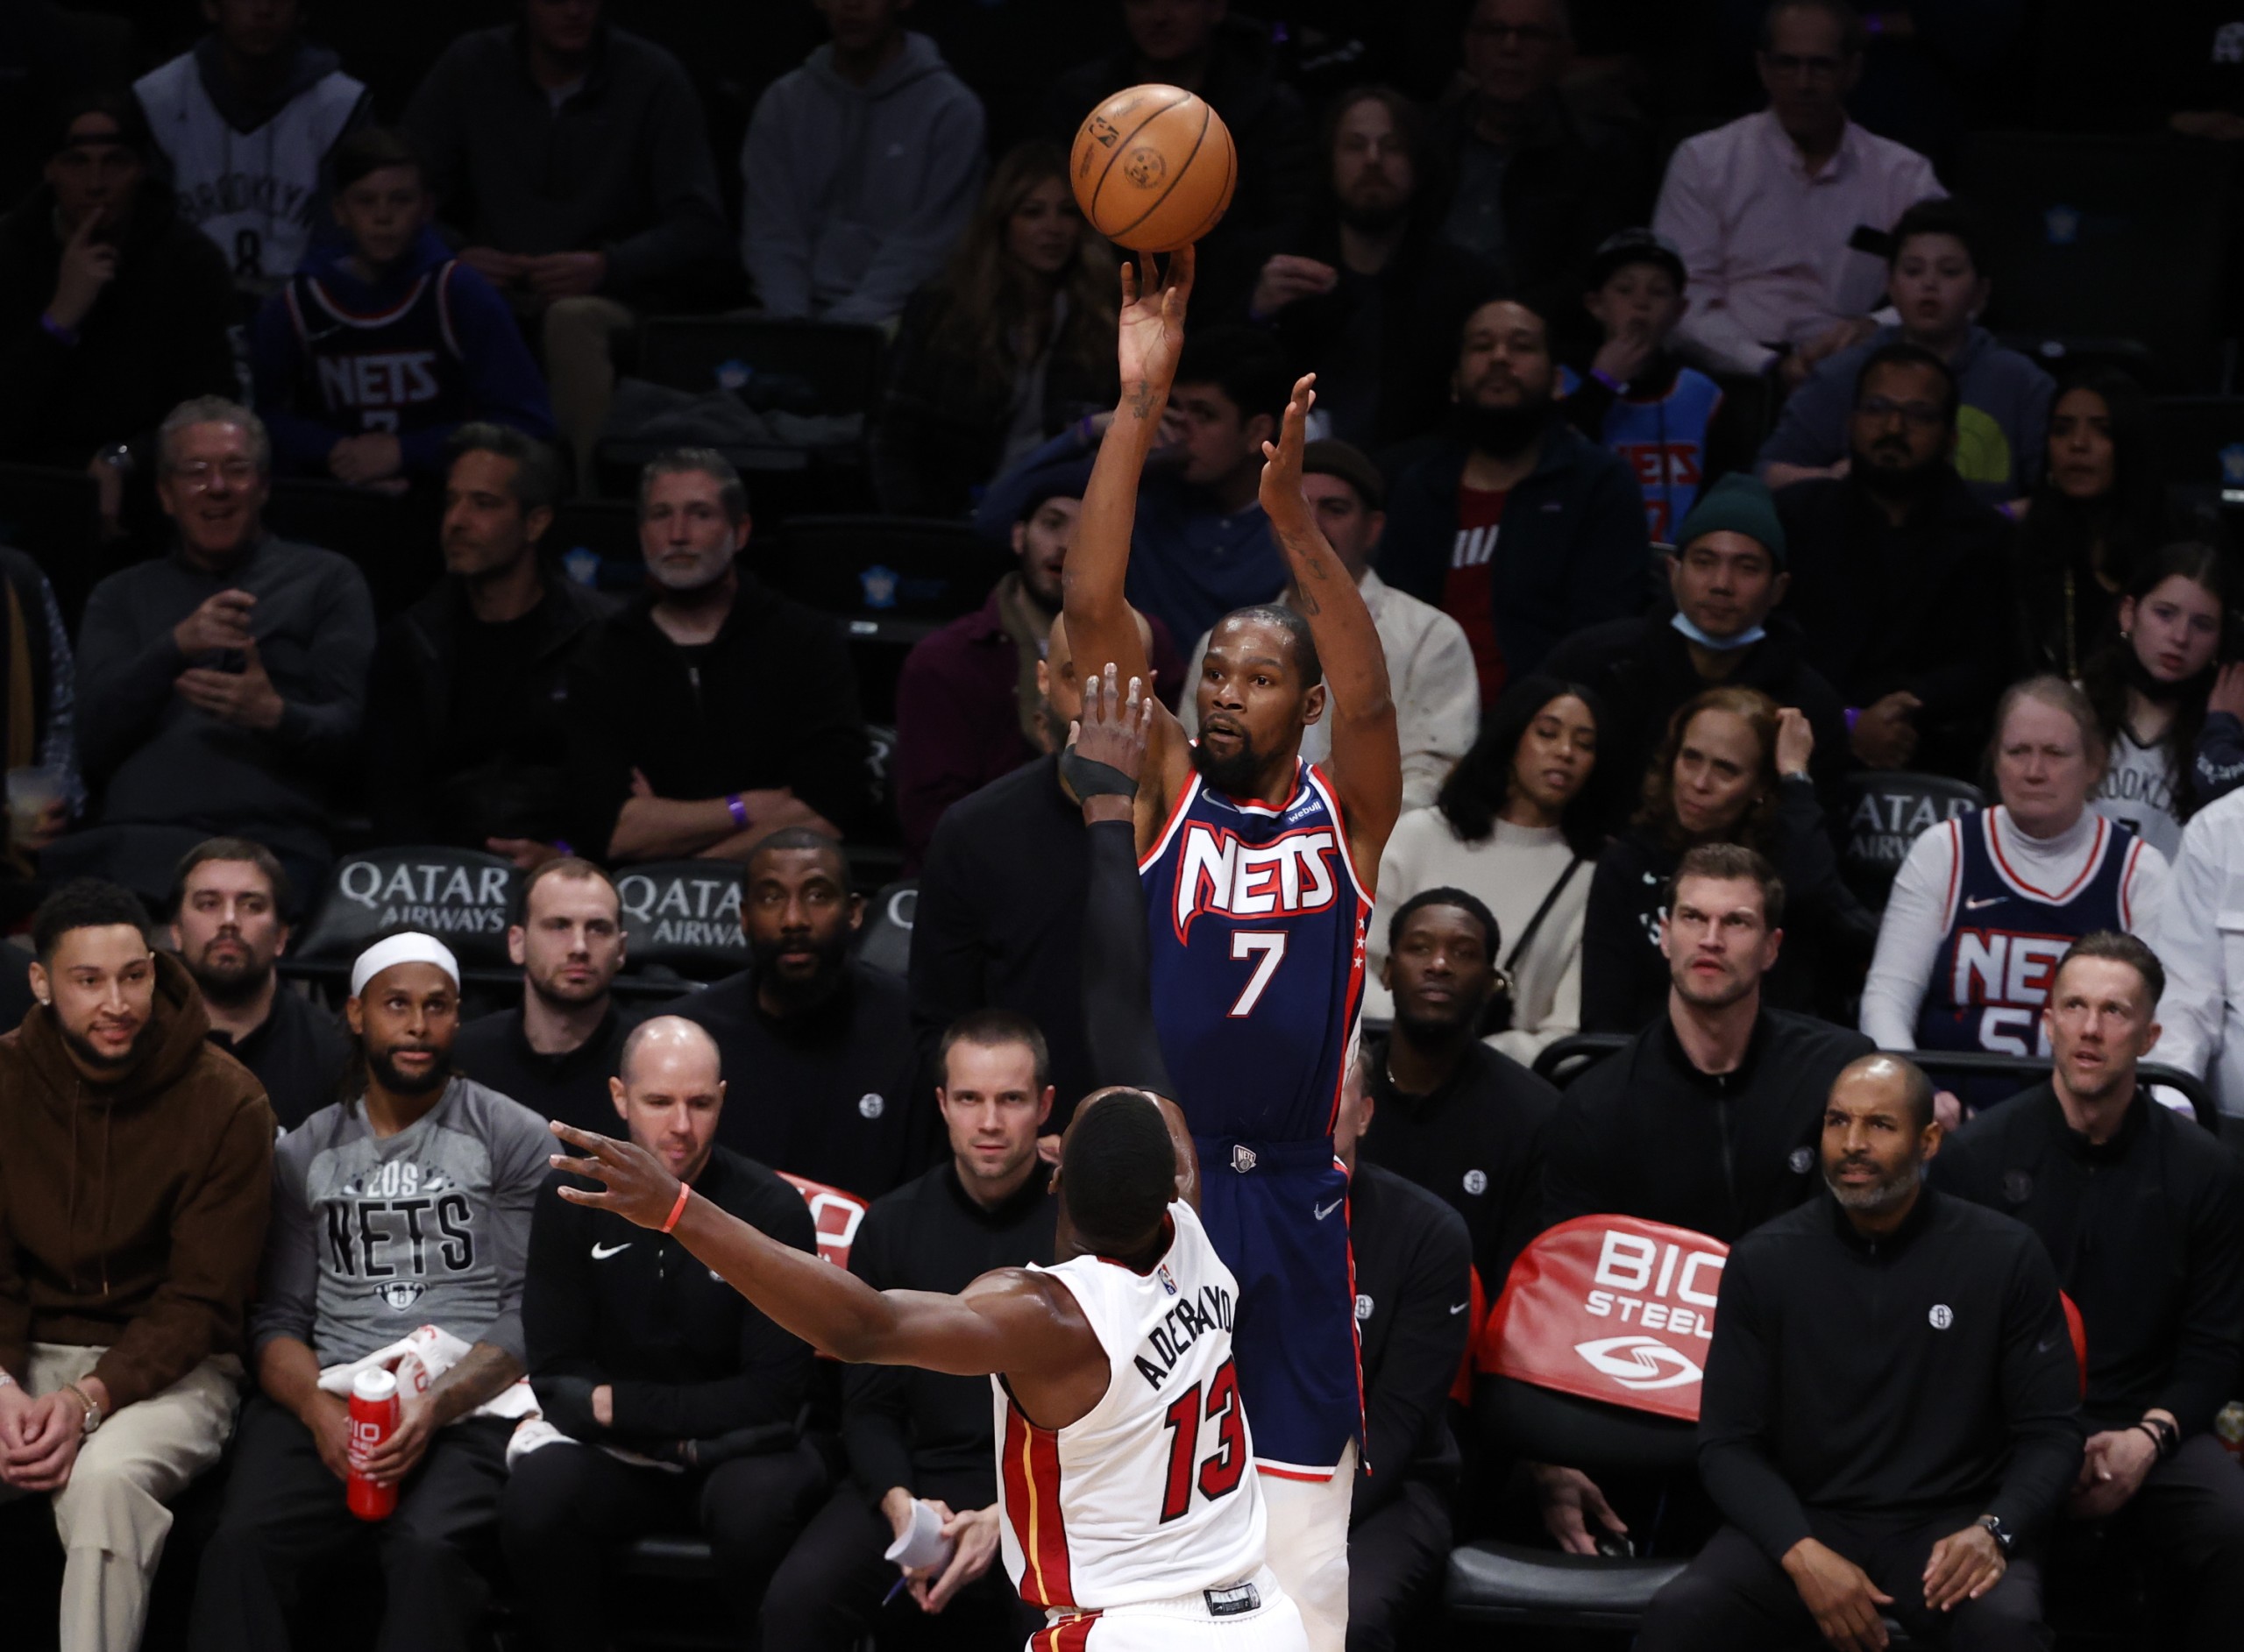 epa09799958 Brooklyn Nets forward Kevin Durant (Top) puts up a shot over a defending Miami Heat center Bam Adebayo (Bottom) during the first half of the NBA basketball game between the Miami Heat and the Brooklyn Nets at the Barclays Center in Brooklyn, New York, USA, 03 March 2022.  EPA/JASON SZENES  SHUTTERSTOCK OUT